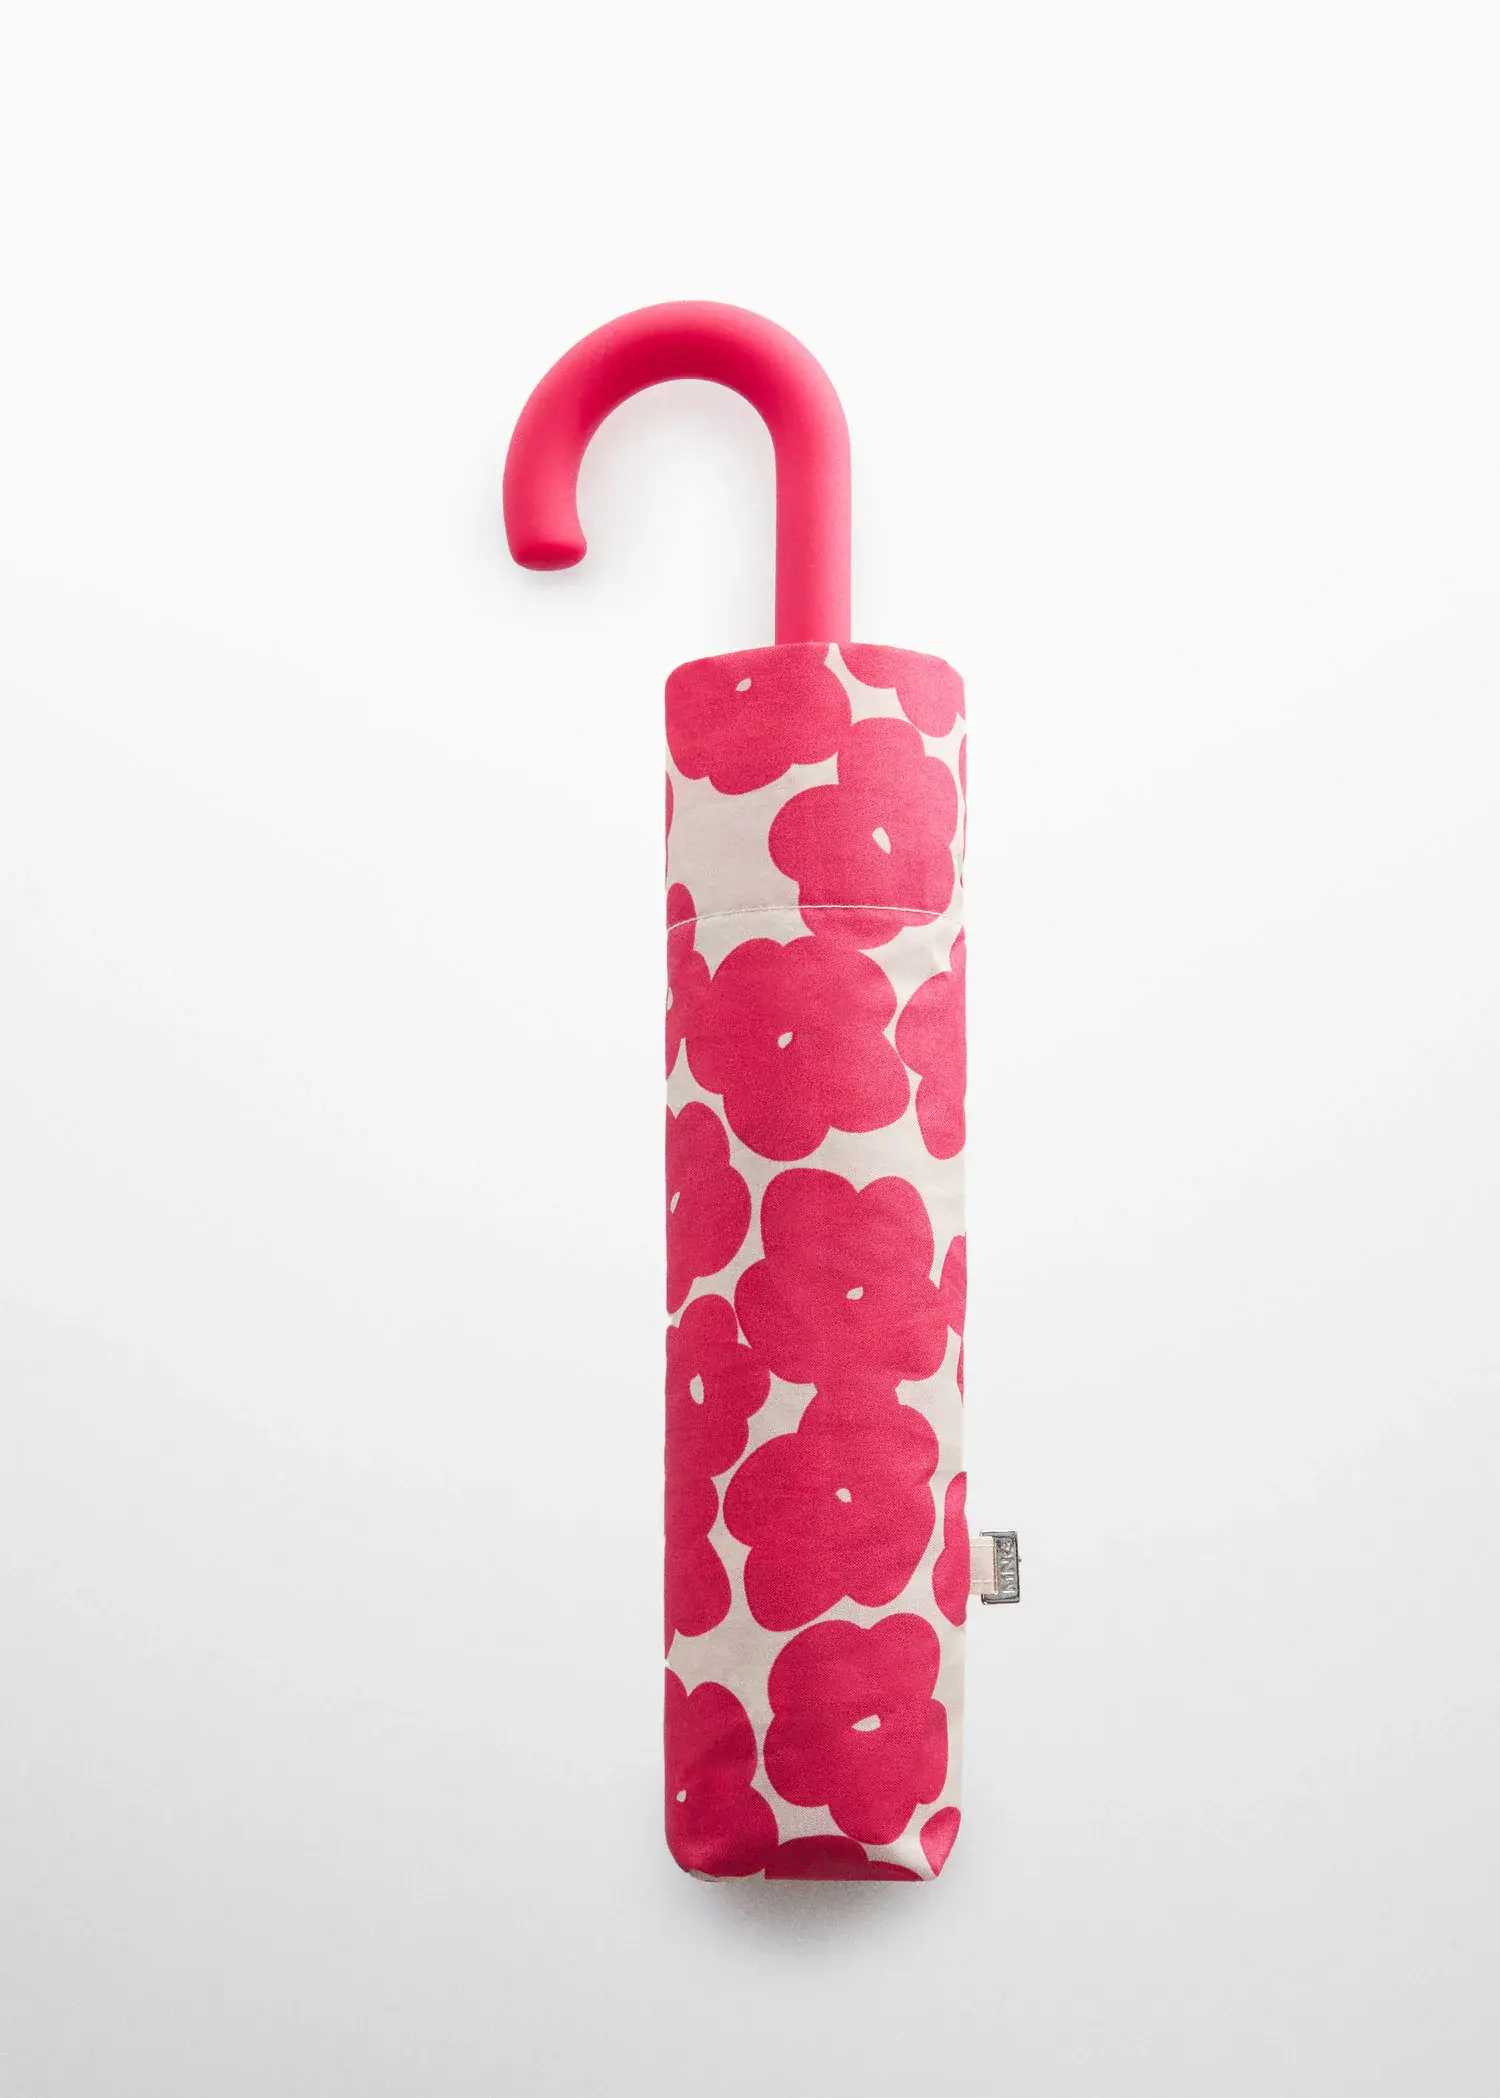 Mango Floral folding umbrella. a pink umbrella with a floral pattern on it. 